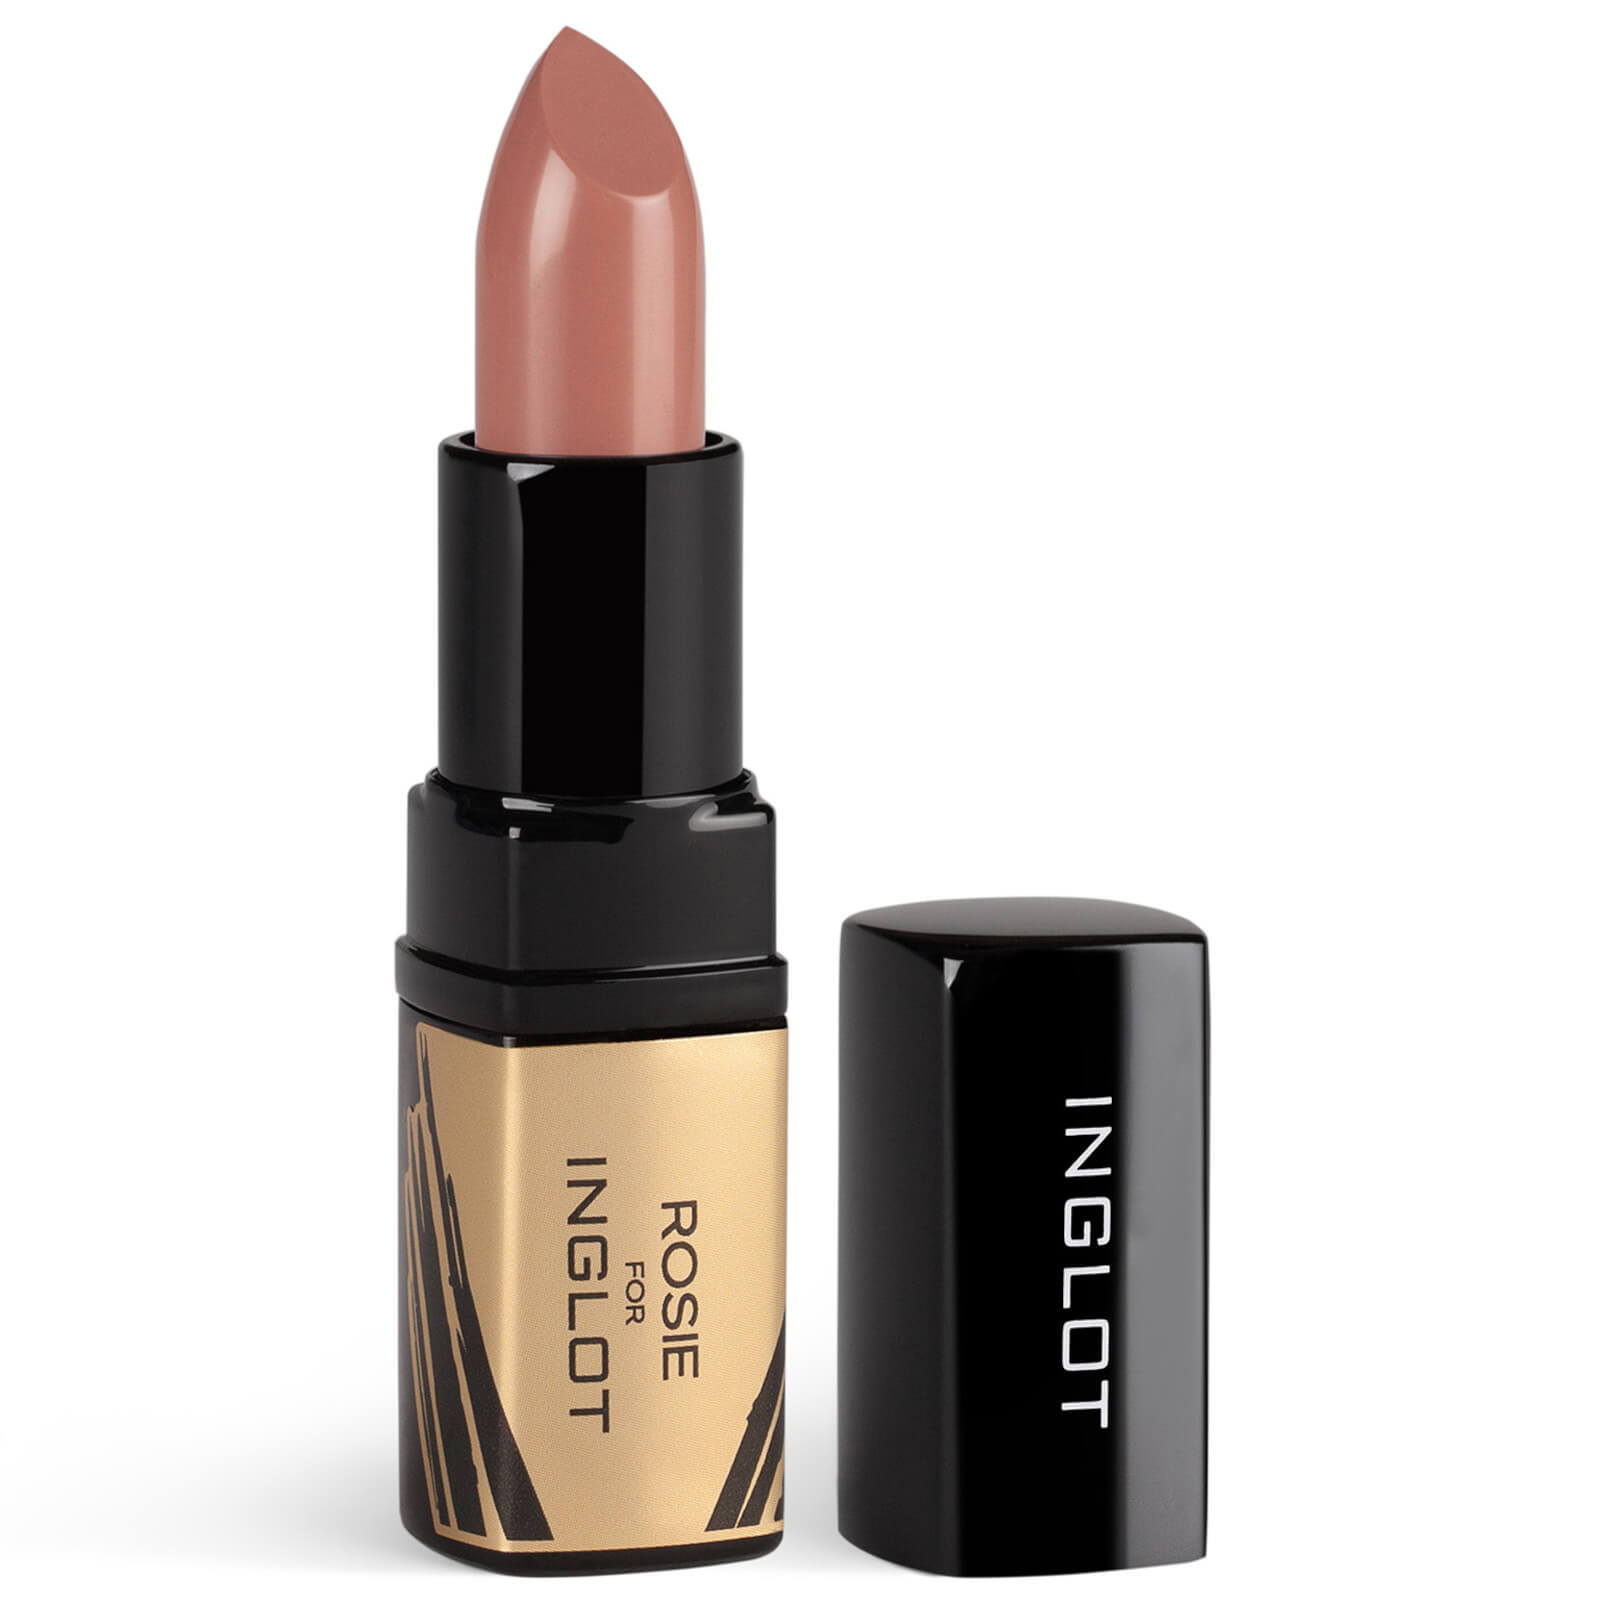 Inglot Rosie for Inglot Dreamy Creamy Lipstick 4g (Various Shades) - Magical Nude